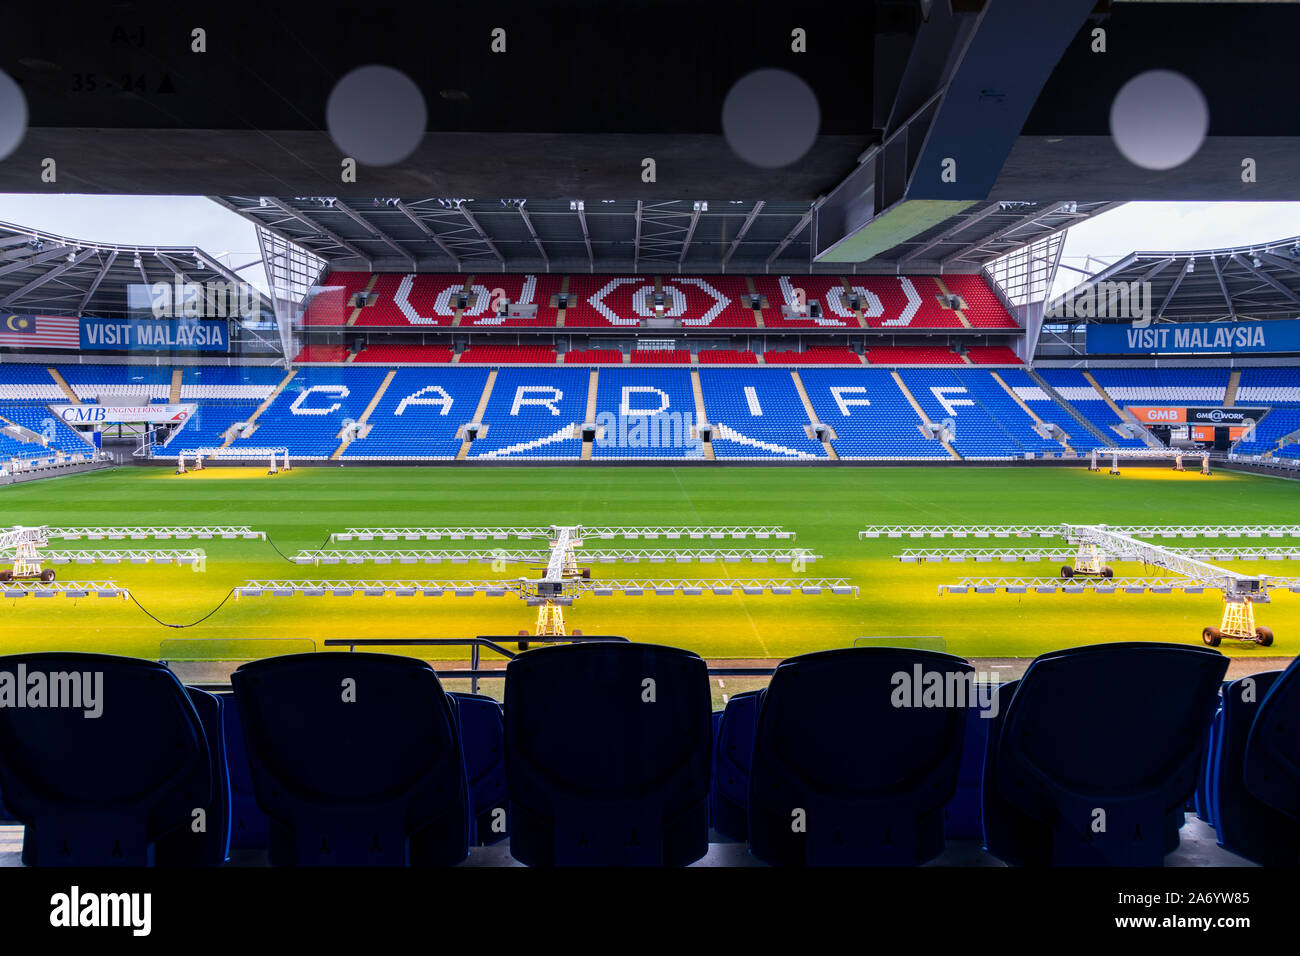 Discovering the Magic of Cardiff City Stadium: Home of the Bluebirds 